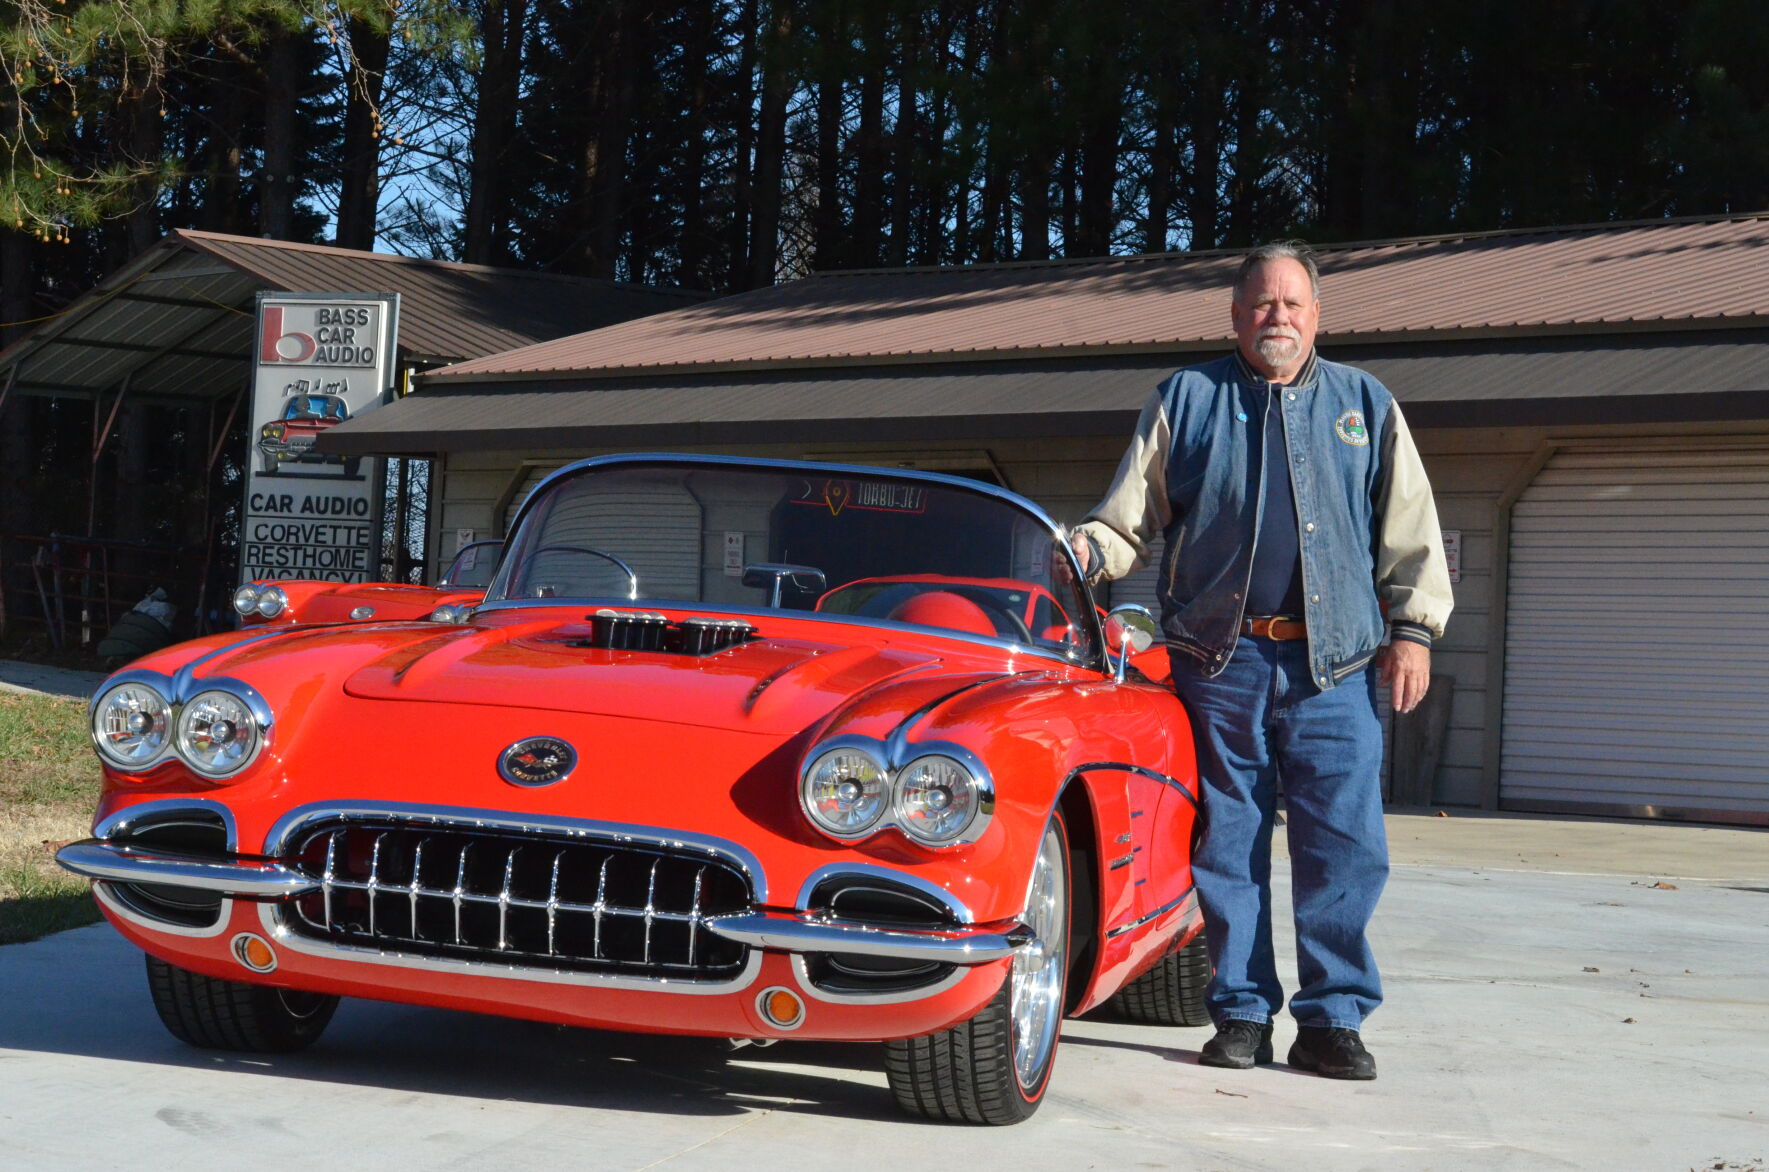 Jerry Lyndon stands beside his 1959 Chevrolet Corvette he customized.